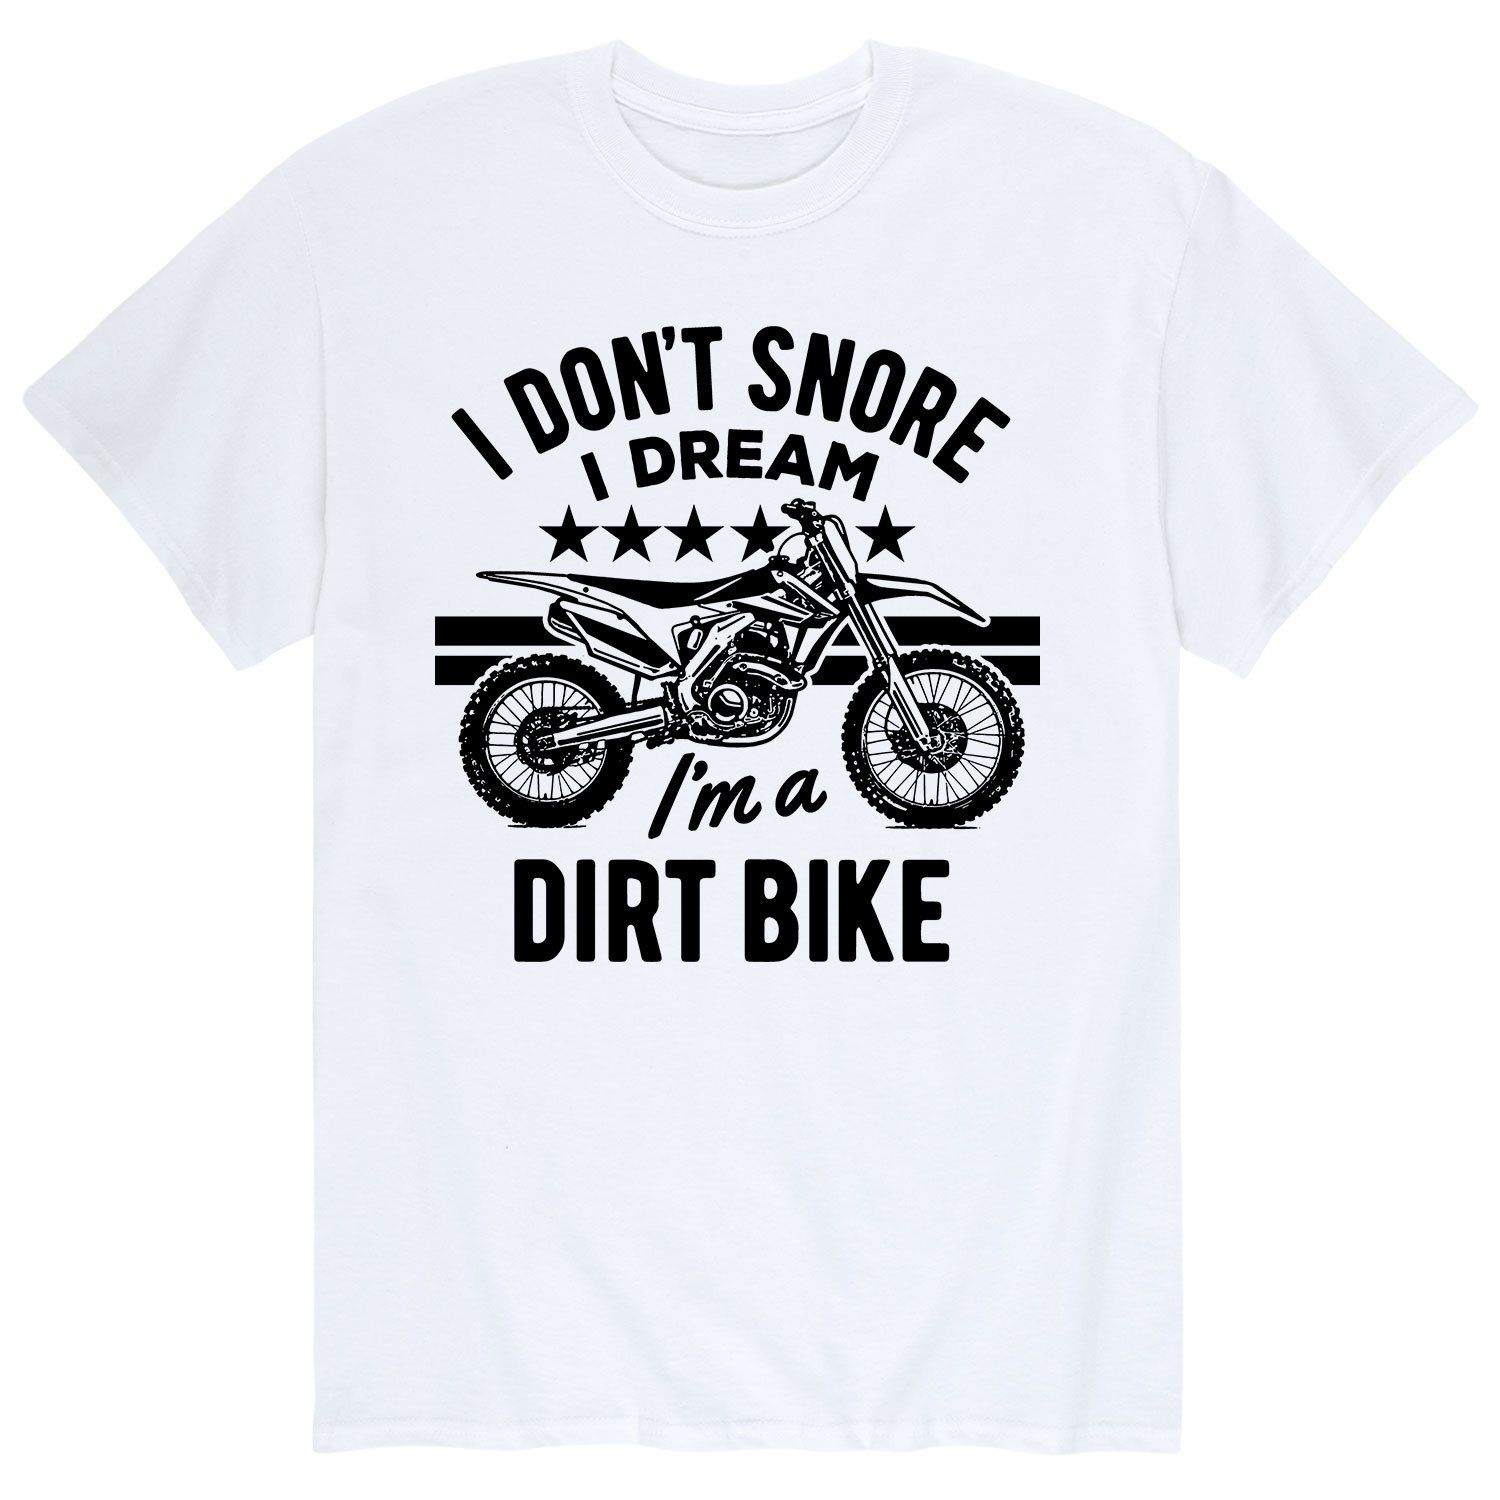 Image for Licensed Character Men's I Dont Snore Dream Dirt Bike Tee at Kohl's.